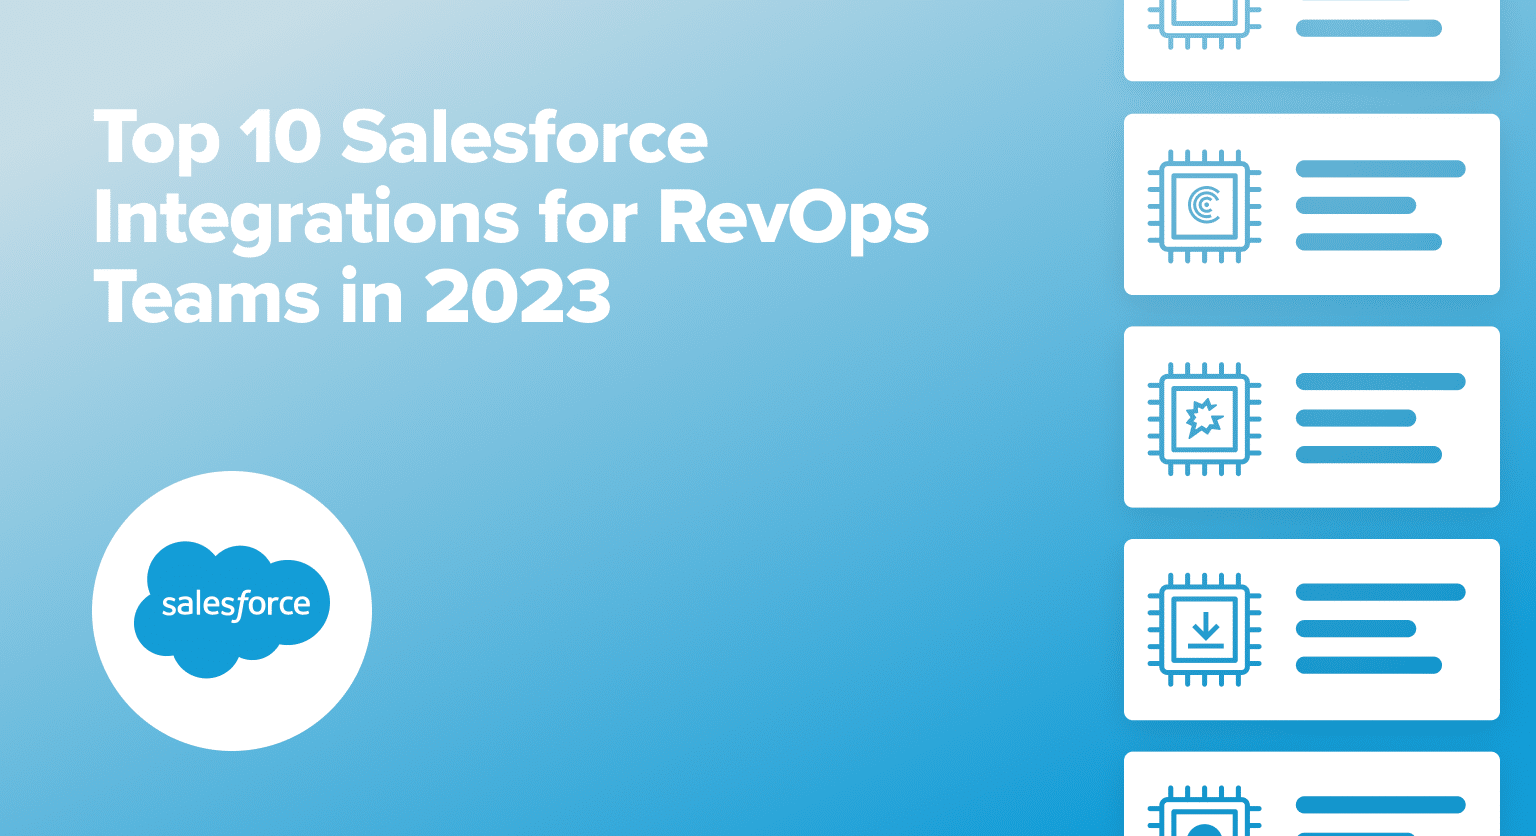 discover the Top 10 Salesforce Integrations for RevOps Teams in 2023